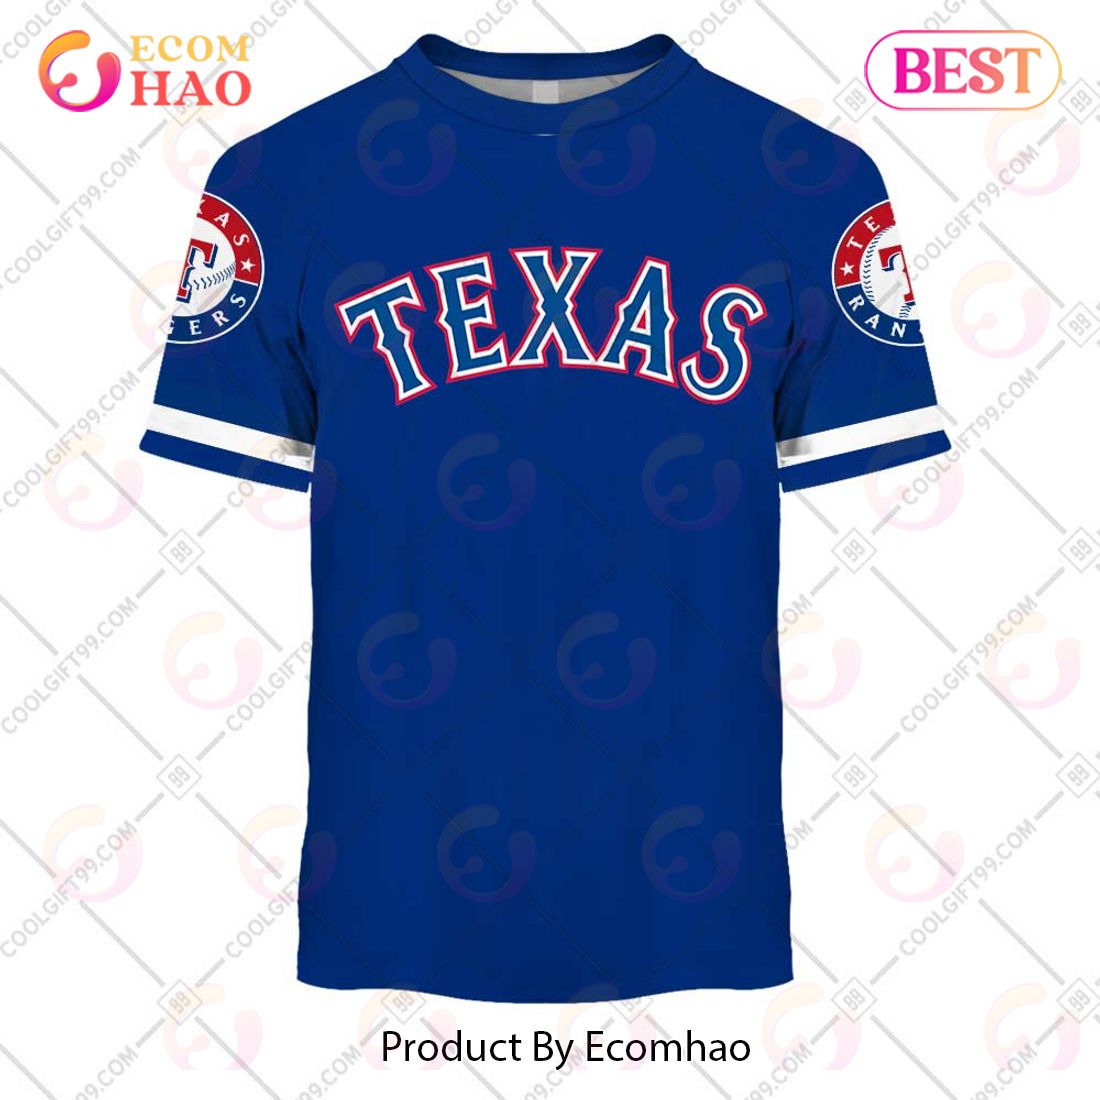 2000 TEXAS RANGERS MAJESTIC JERSEY (HOME) S